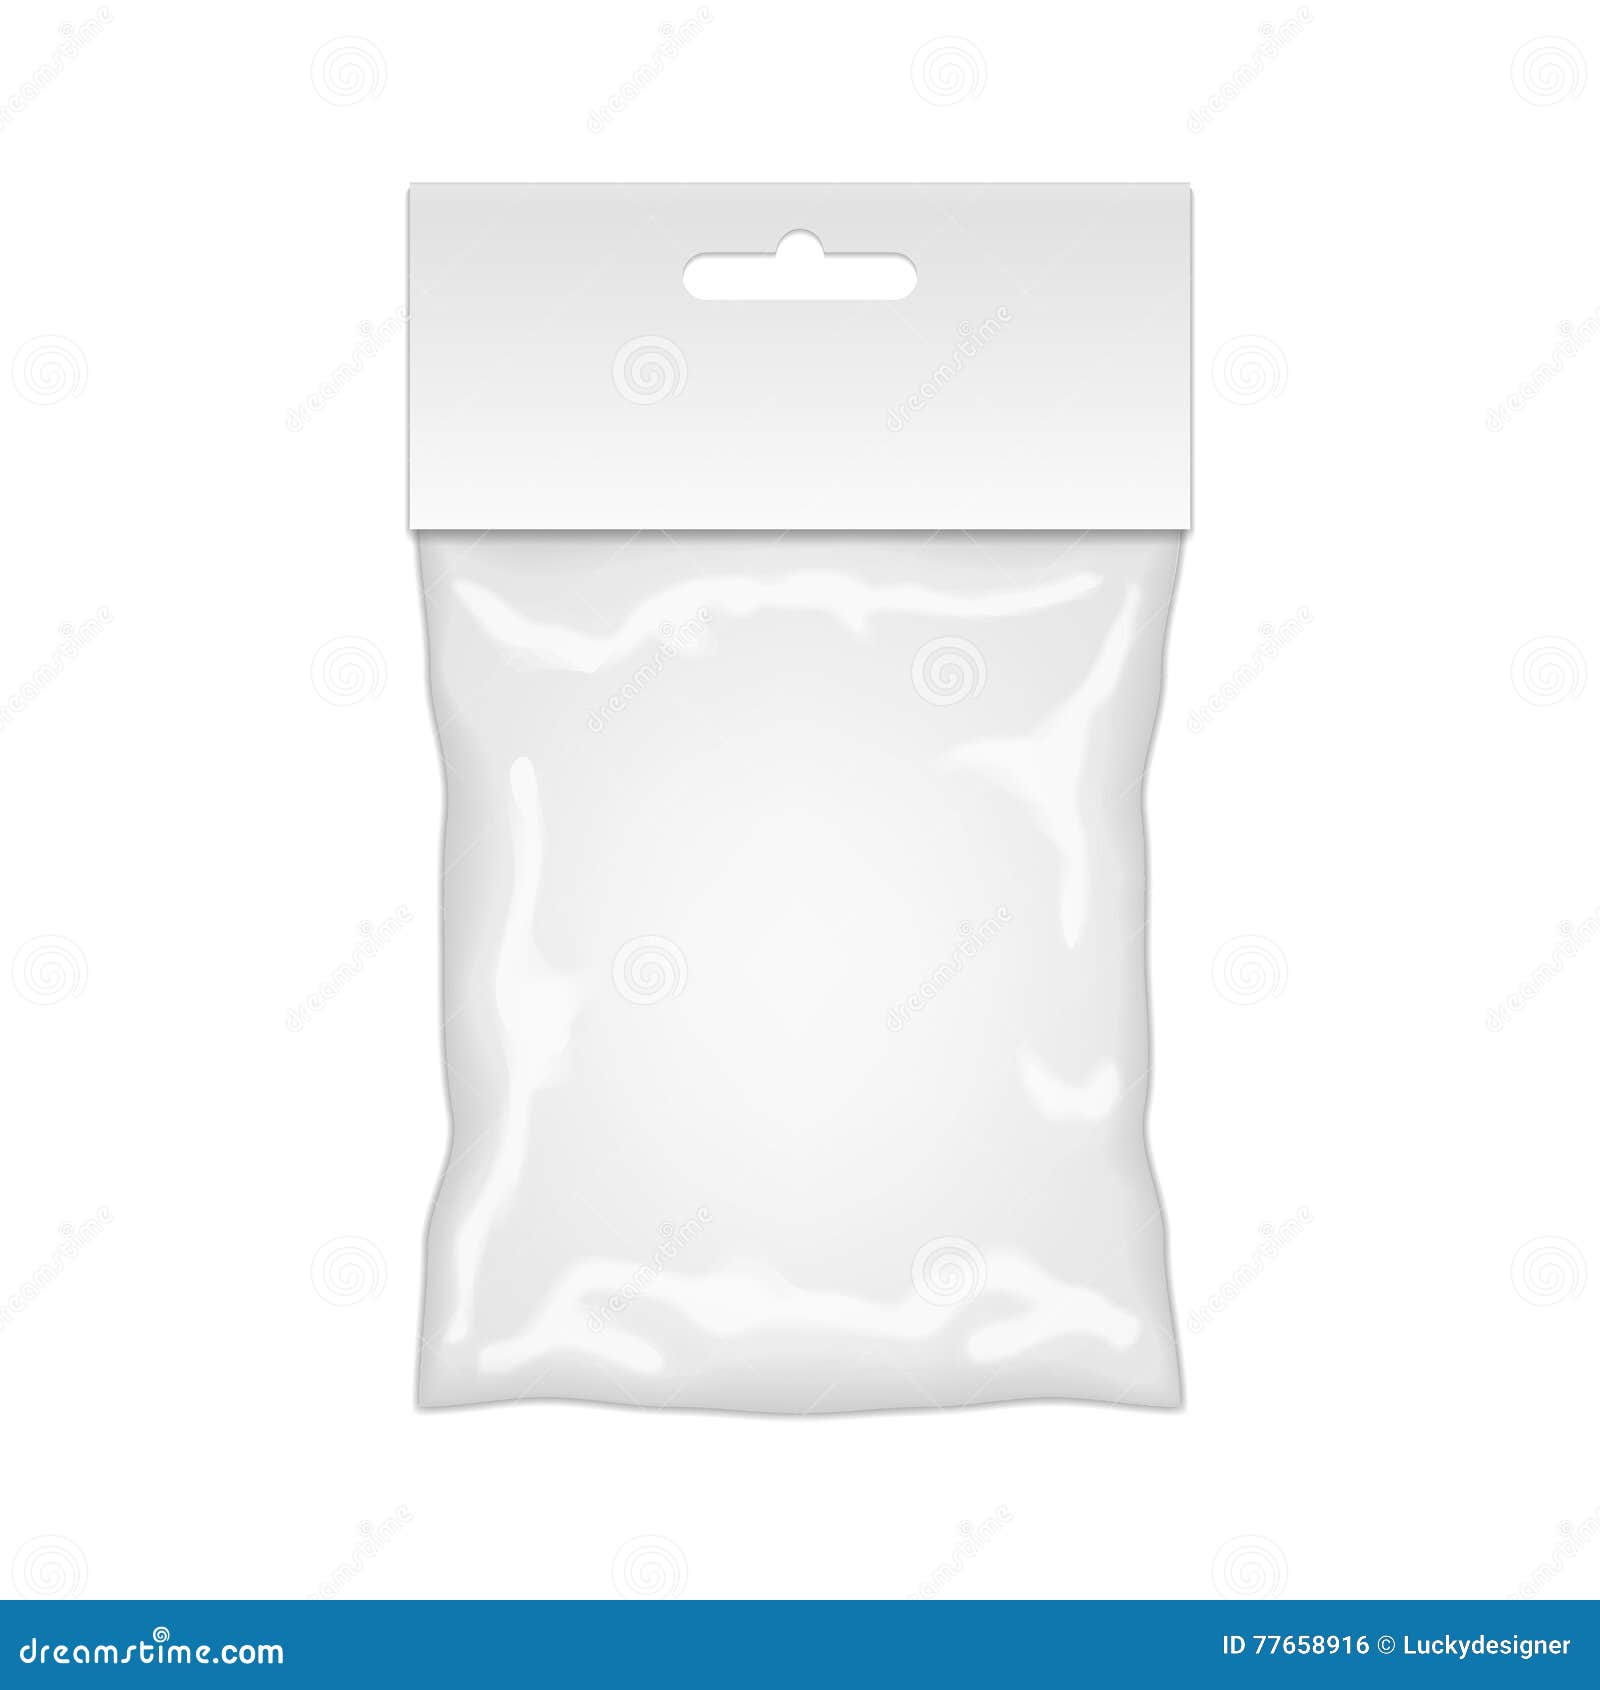 Download Plastic Bag Mockup Ready For Your Design Blank Packaging Stock Vector Illustration Of Container Blank 77658916